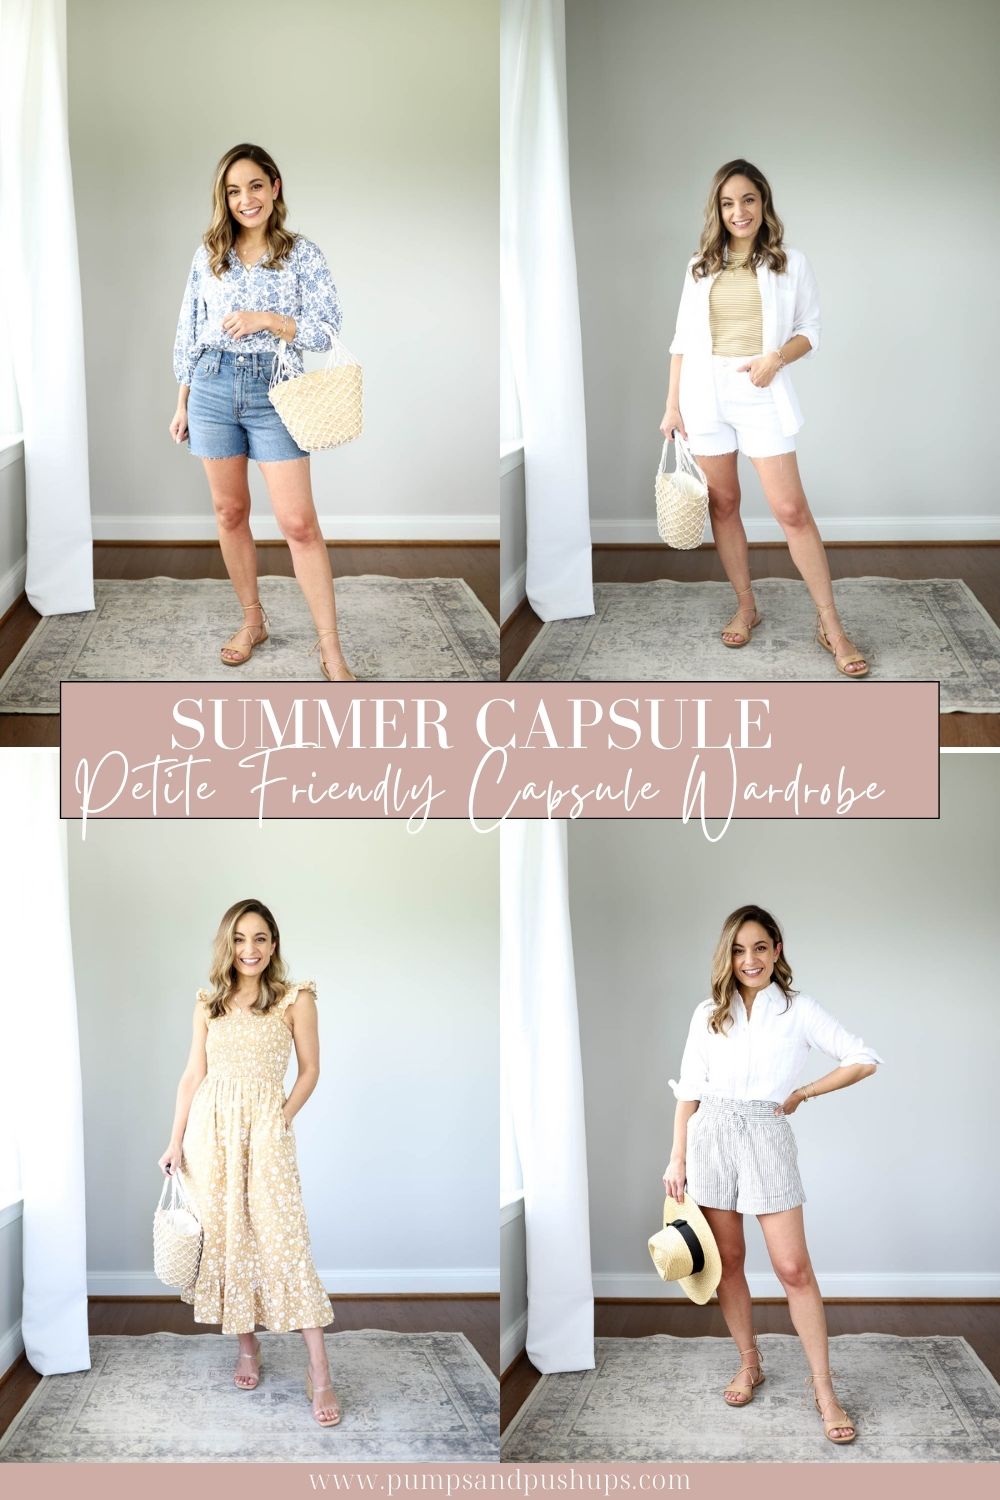 Chase the Sun with this Mini-Capsule Wardrobe